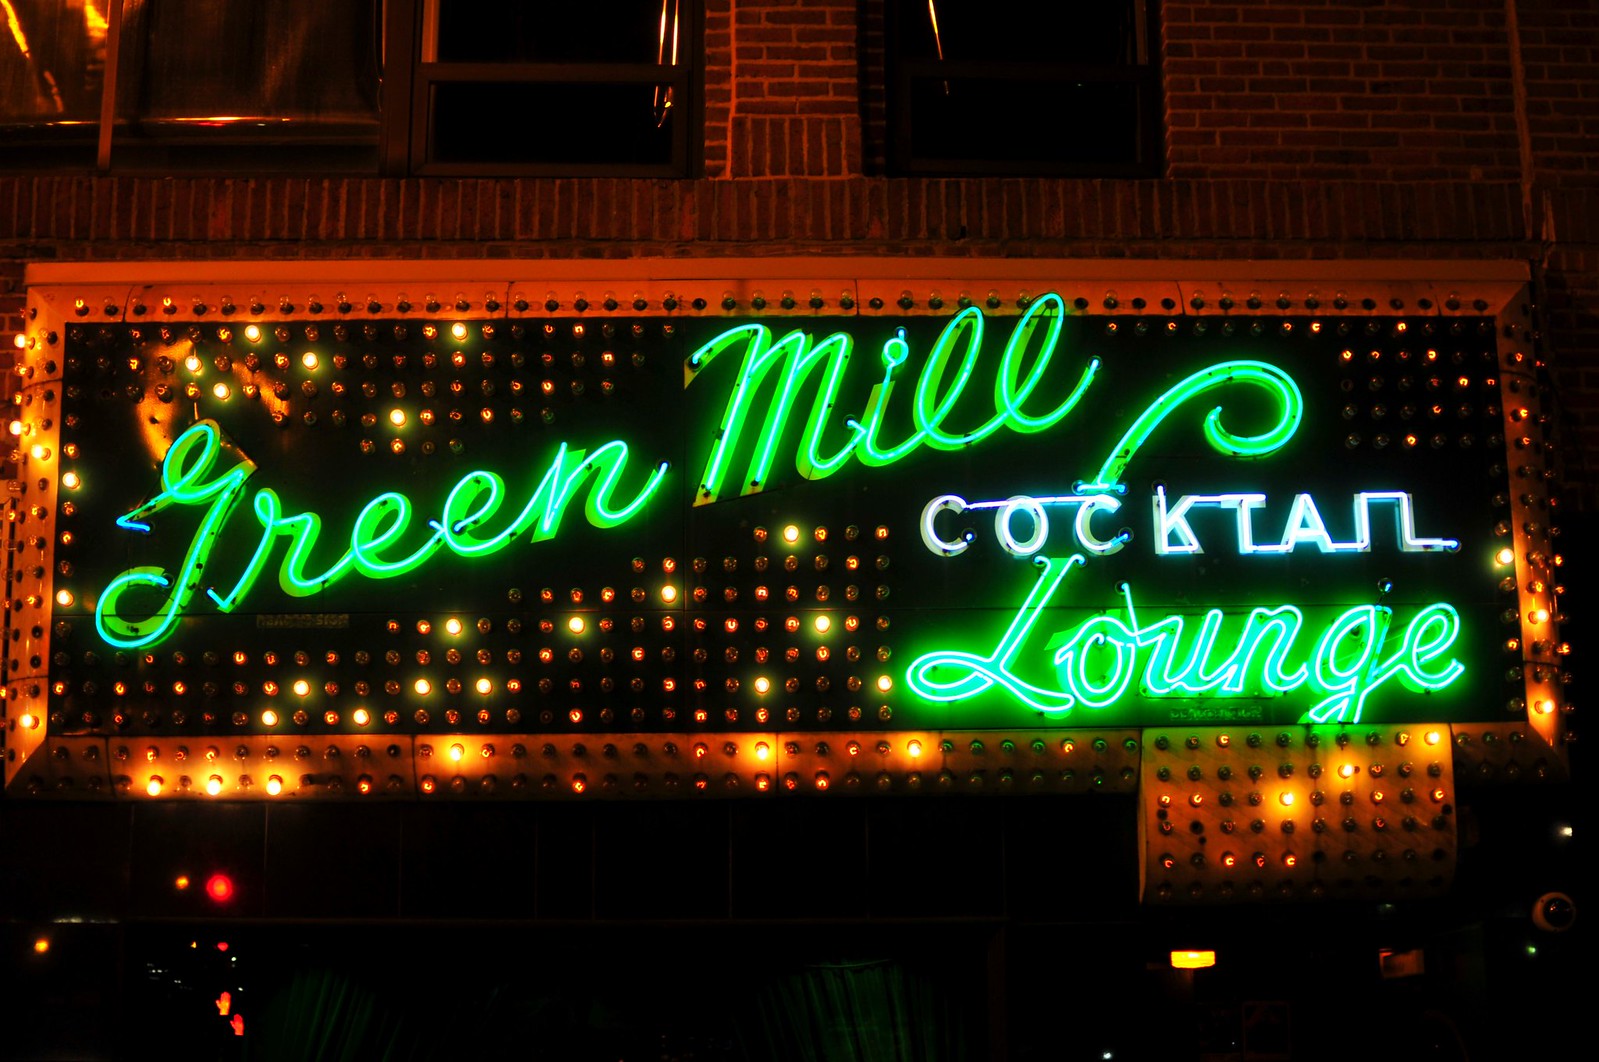 Green Mill Cocktail Lounge - 4802 North Broadway, Chicago, Illinois U.S.A. - September 17, 2011